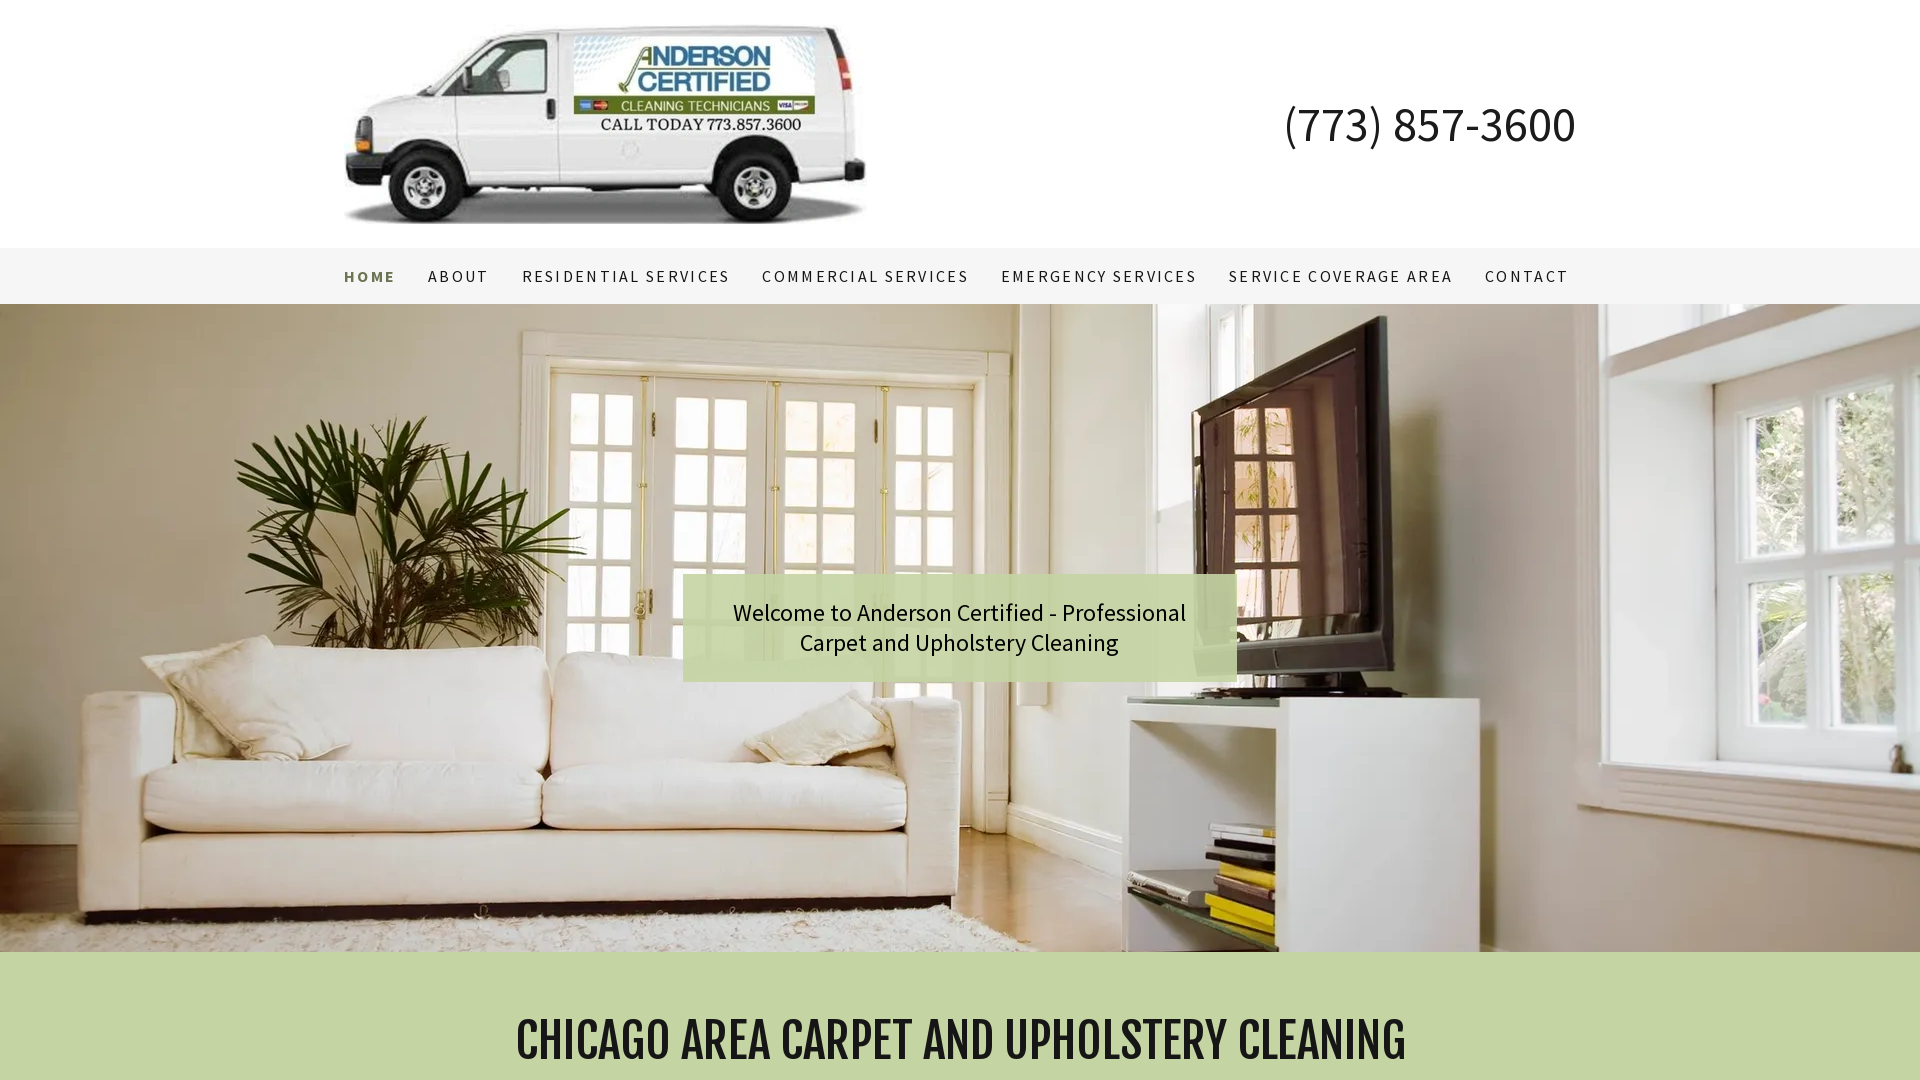 Anderson Certified Cleaning Technicians